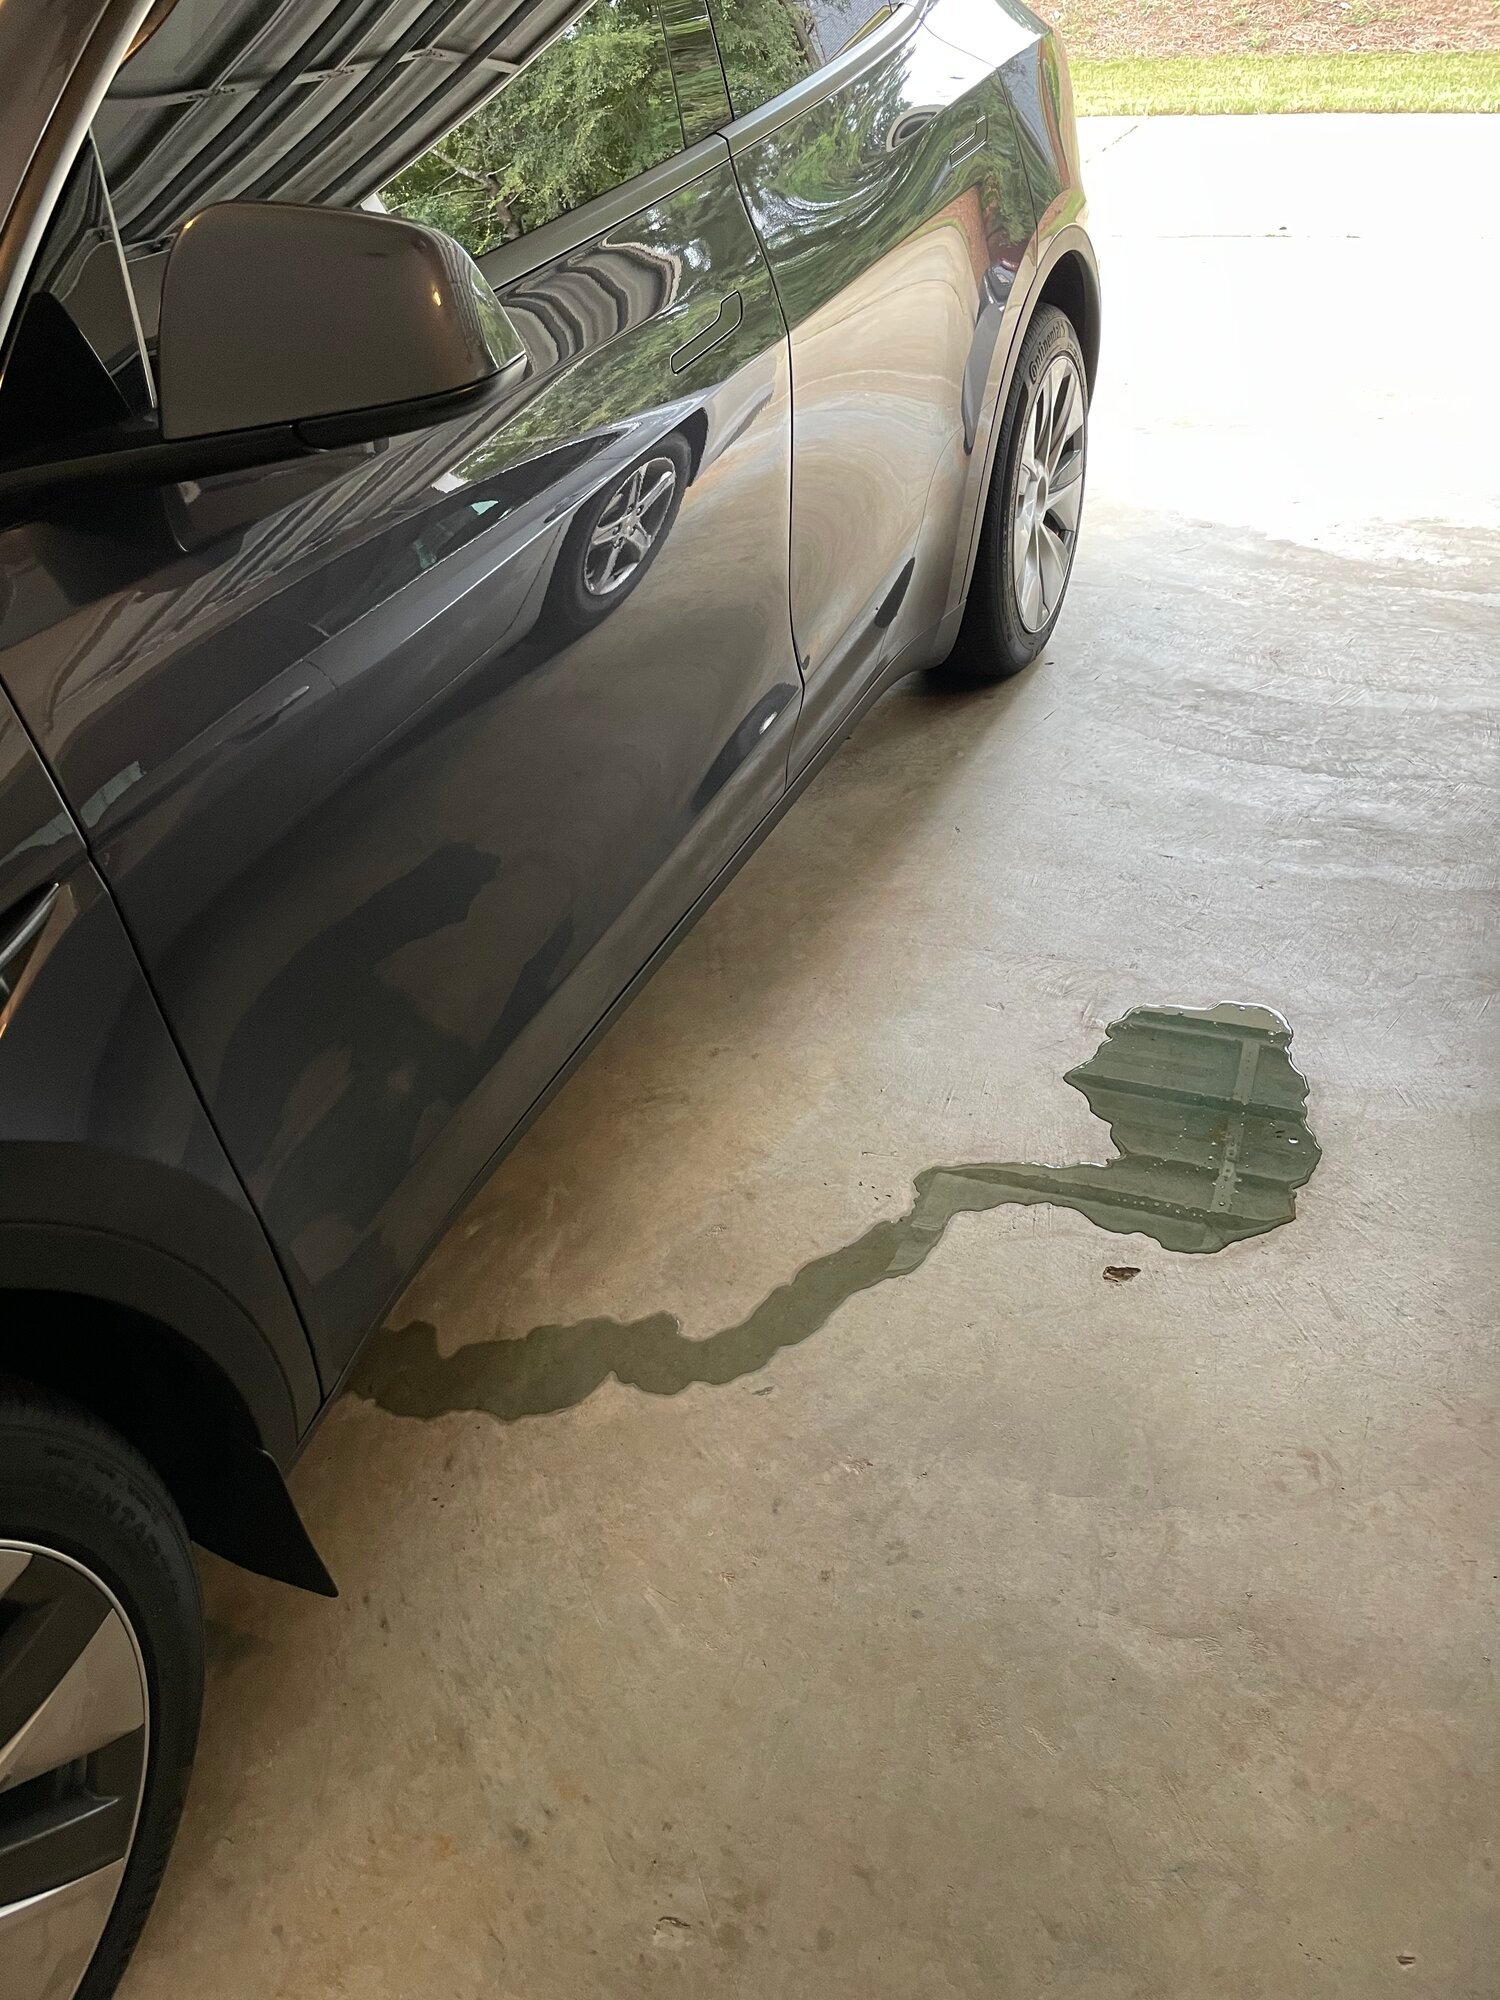 Location of my MY disconnected windshield wiper fluid hose. : r/TeslaModelY